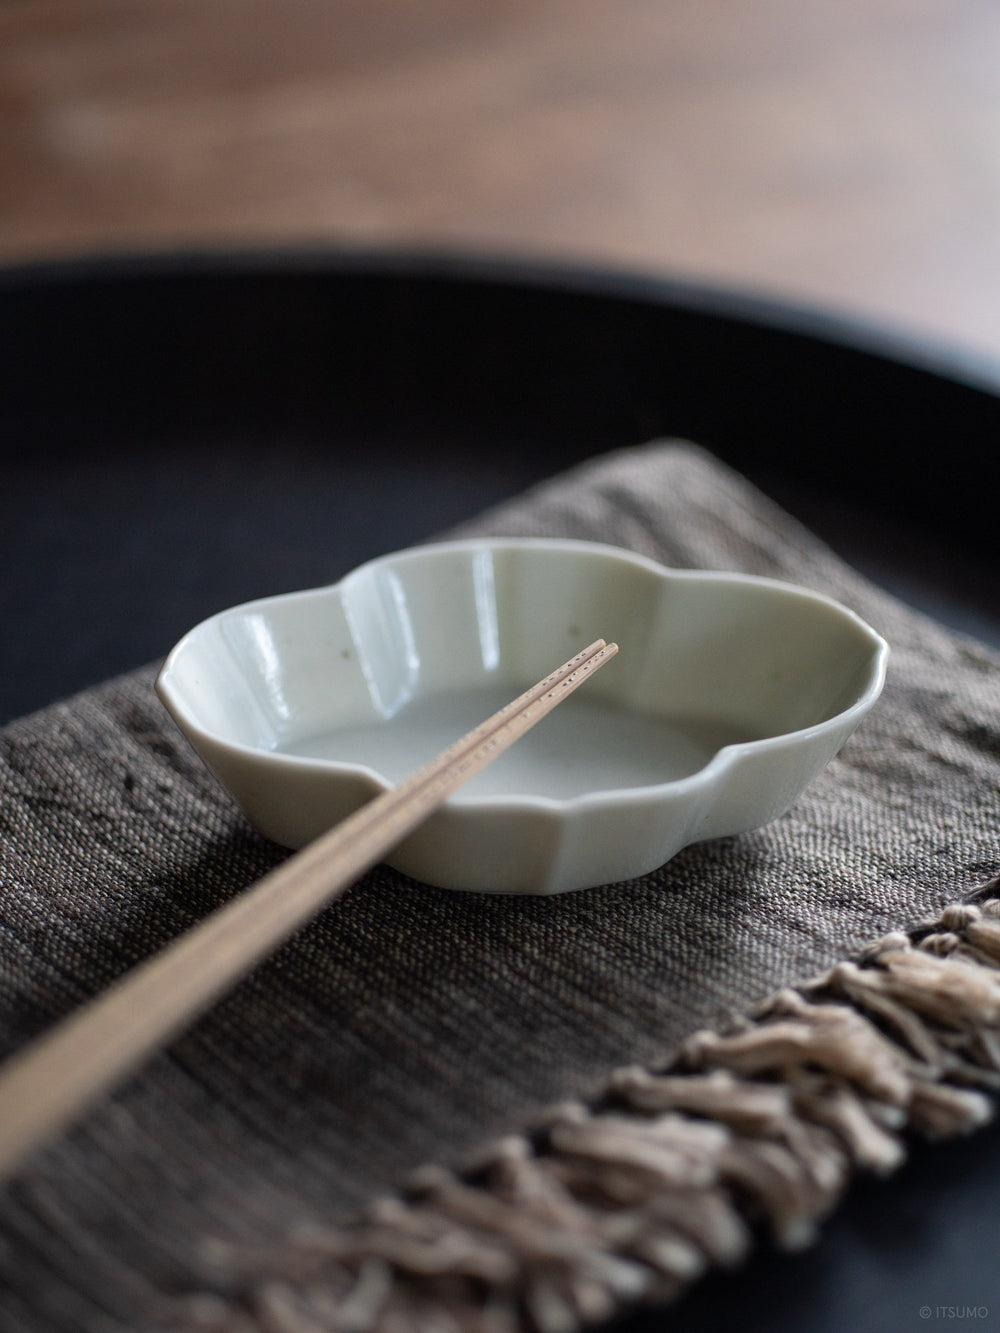 Close up of a small Azmaya serving dish for soy sauce or garnishes, with some chopsticks